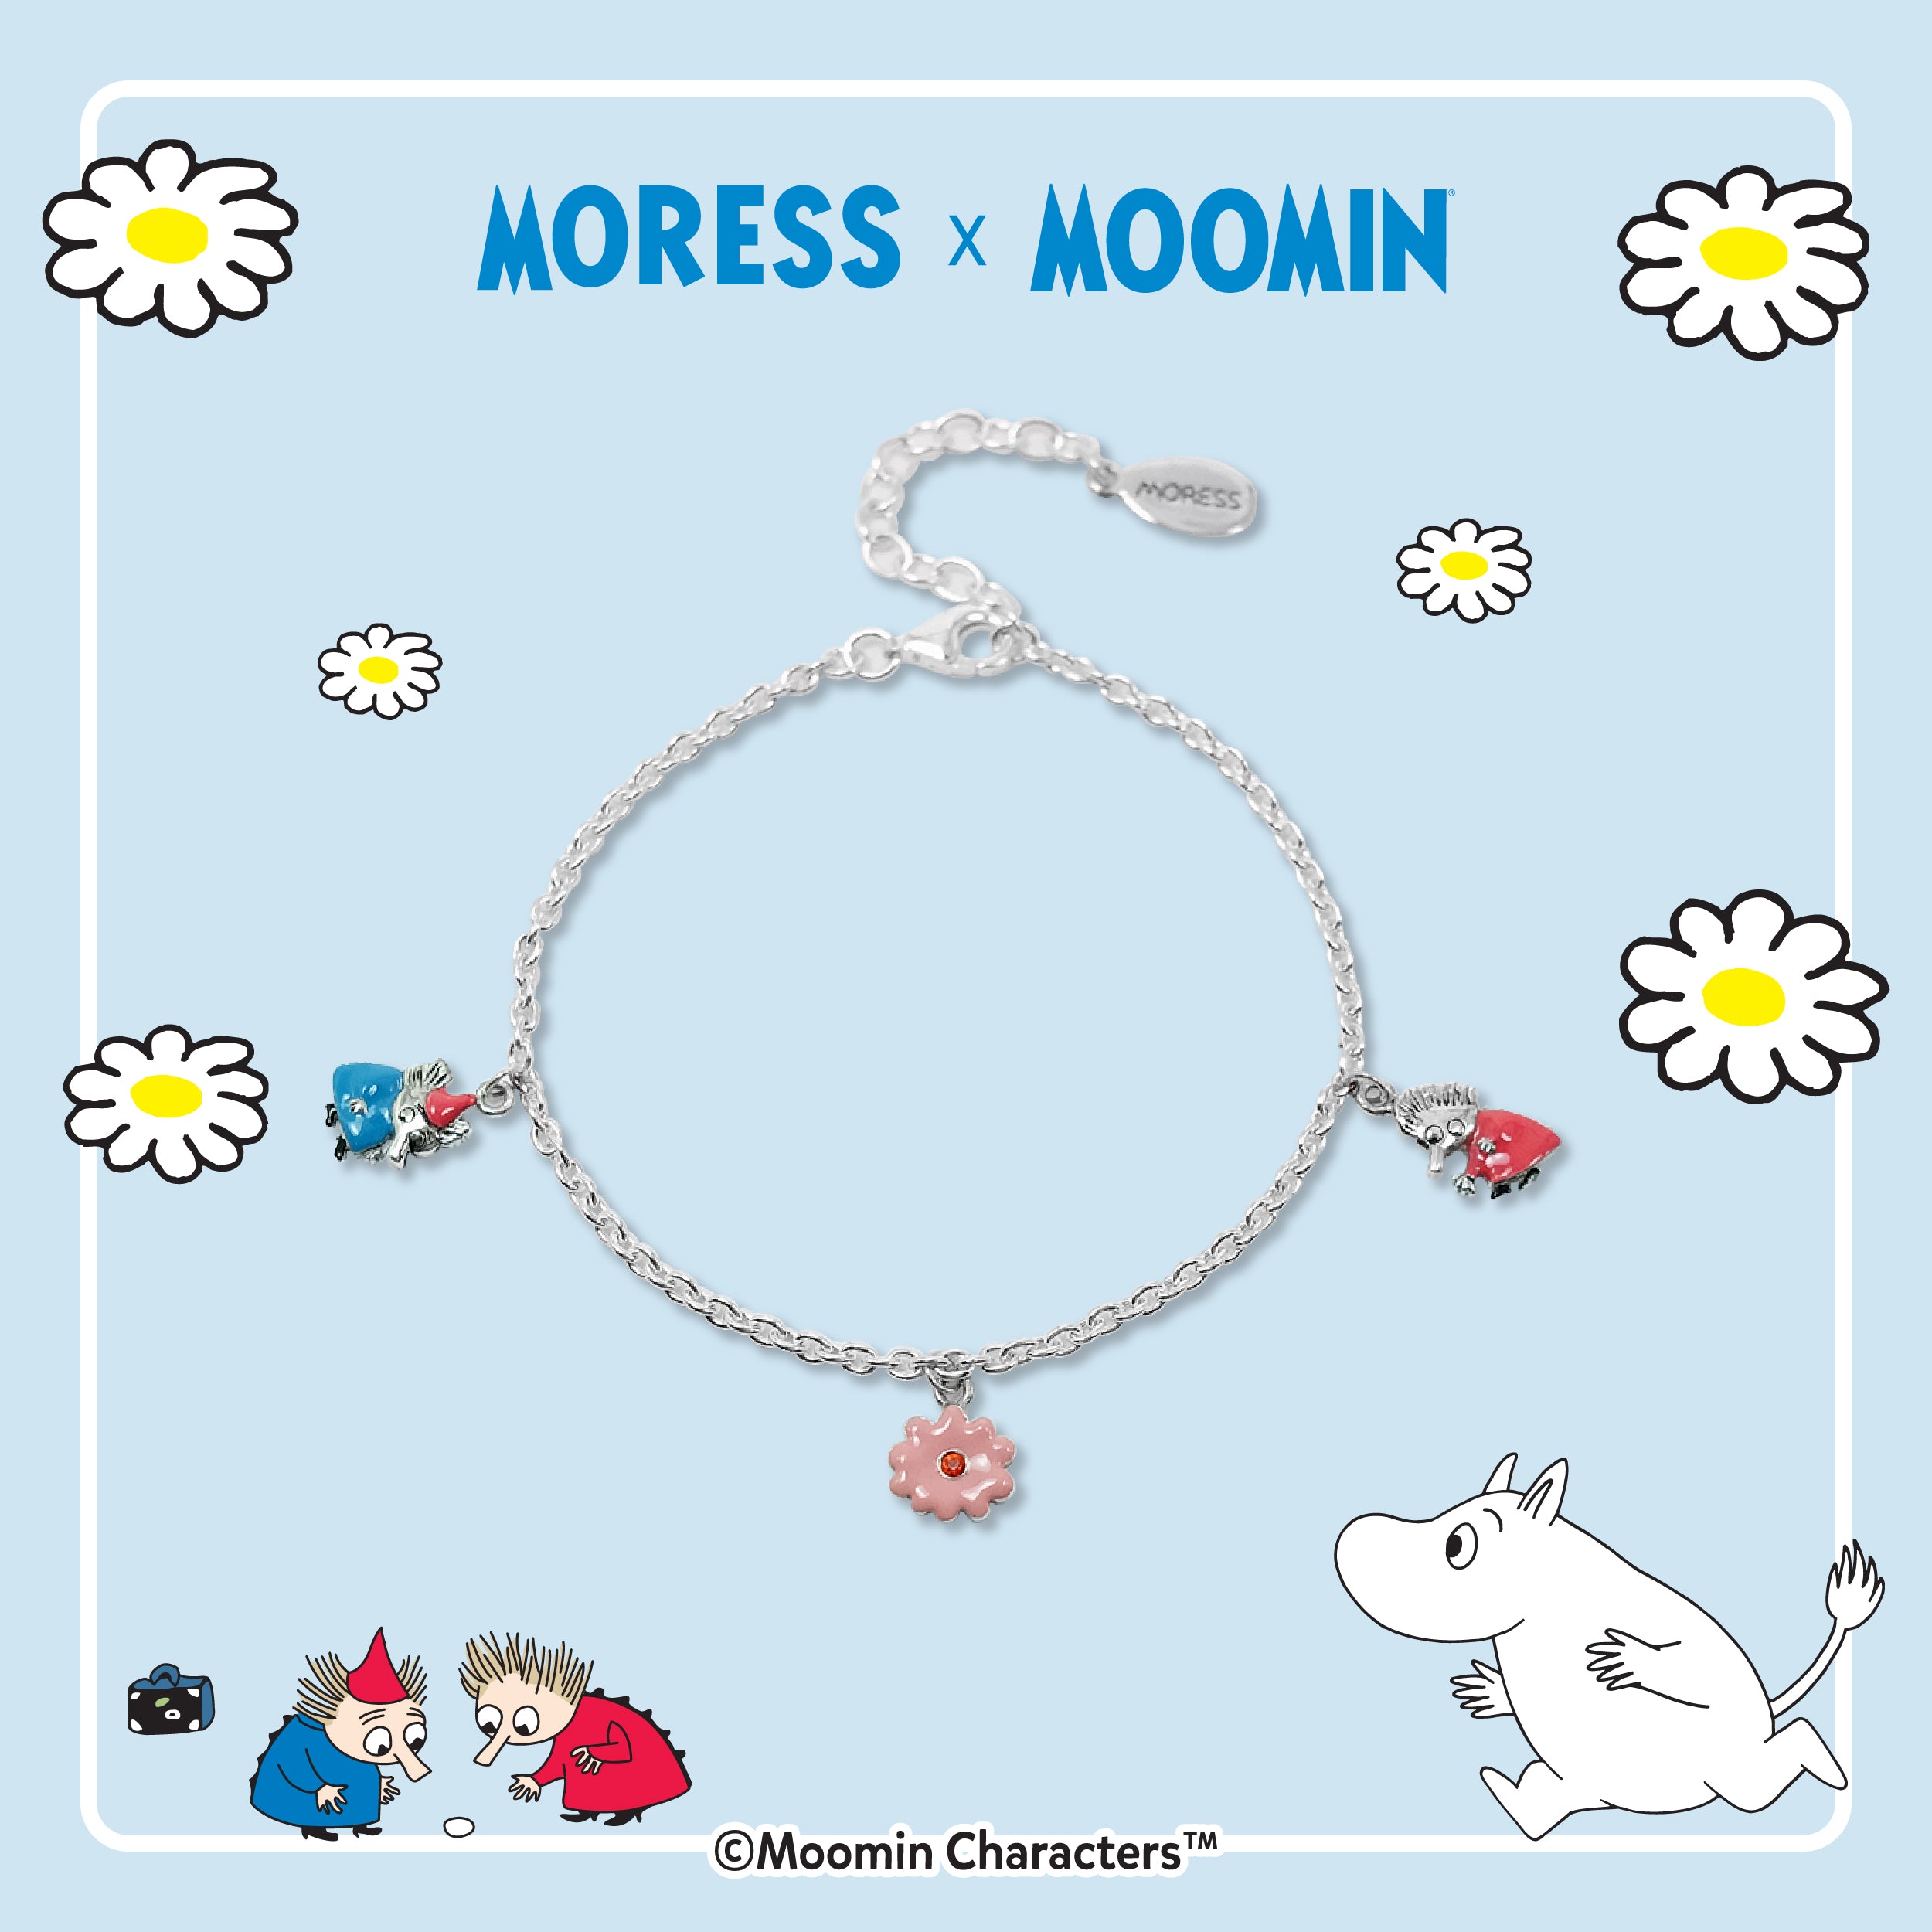 Snorkmaiden and Moomintroll Gold Bracelet - Moress Charms - The